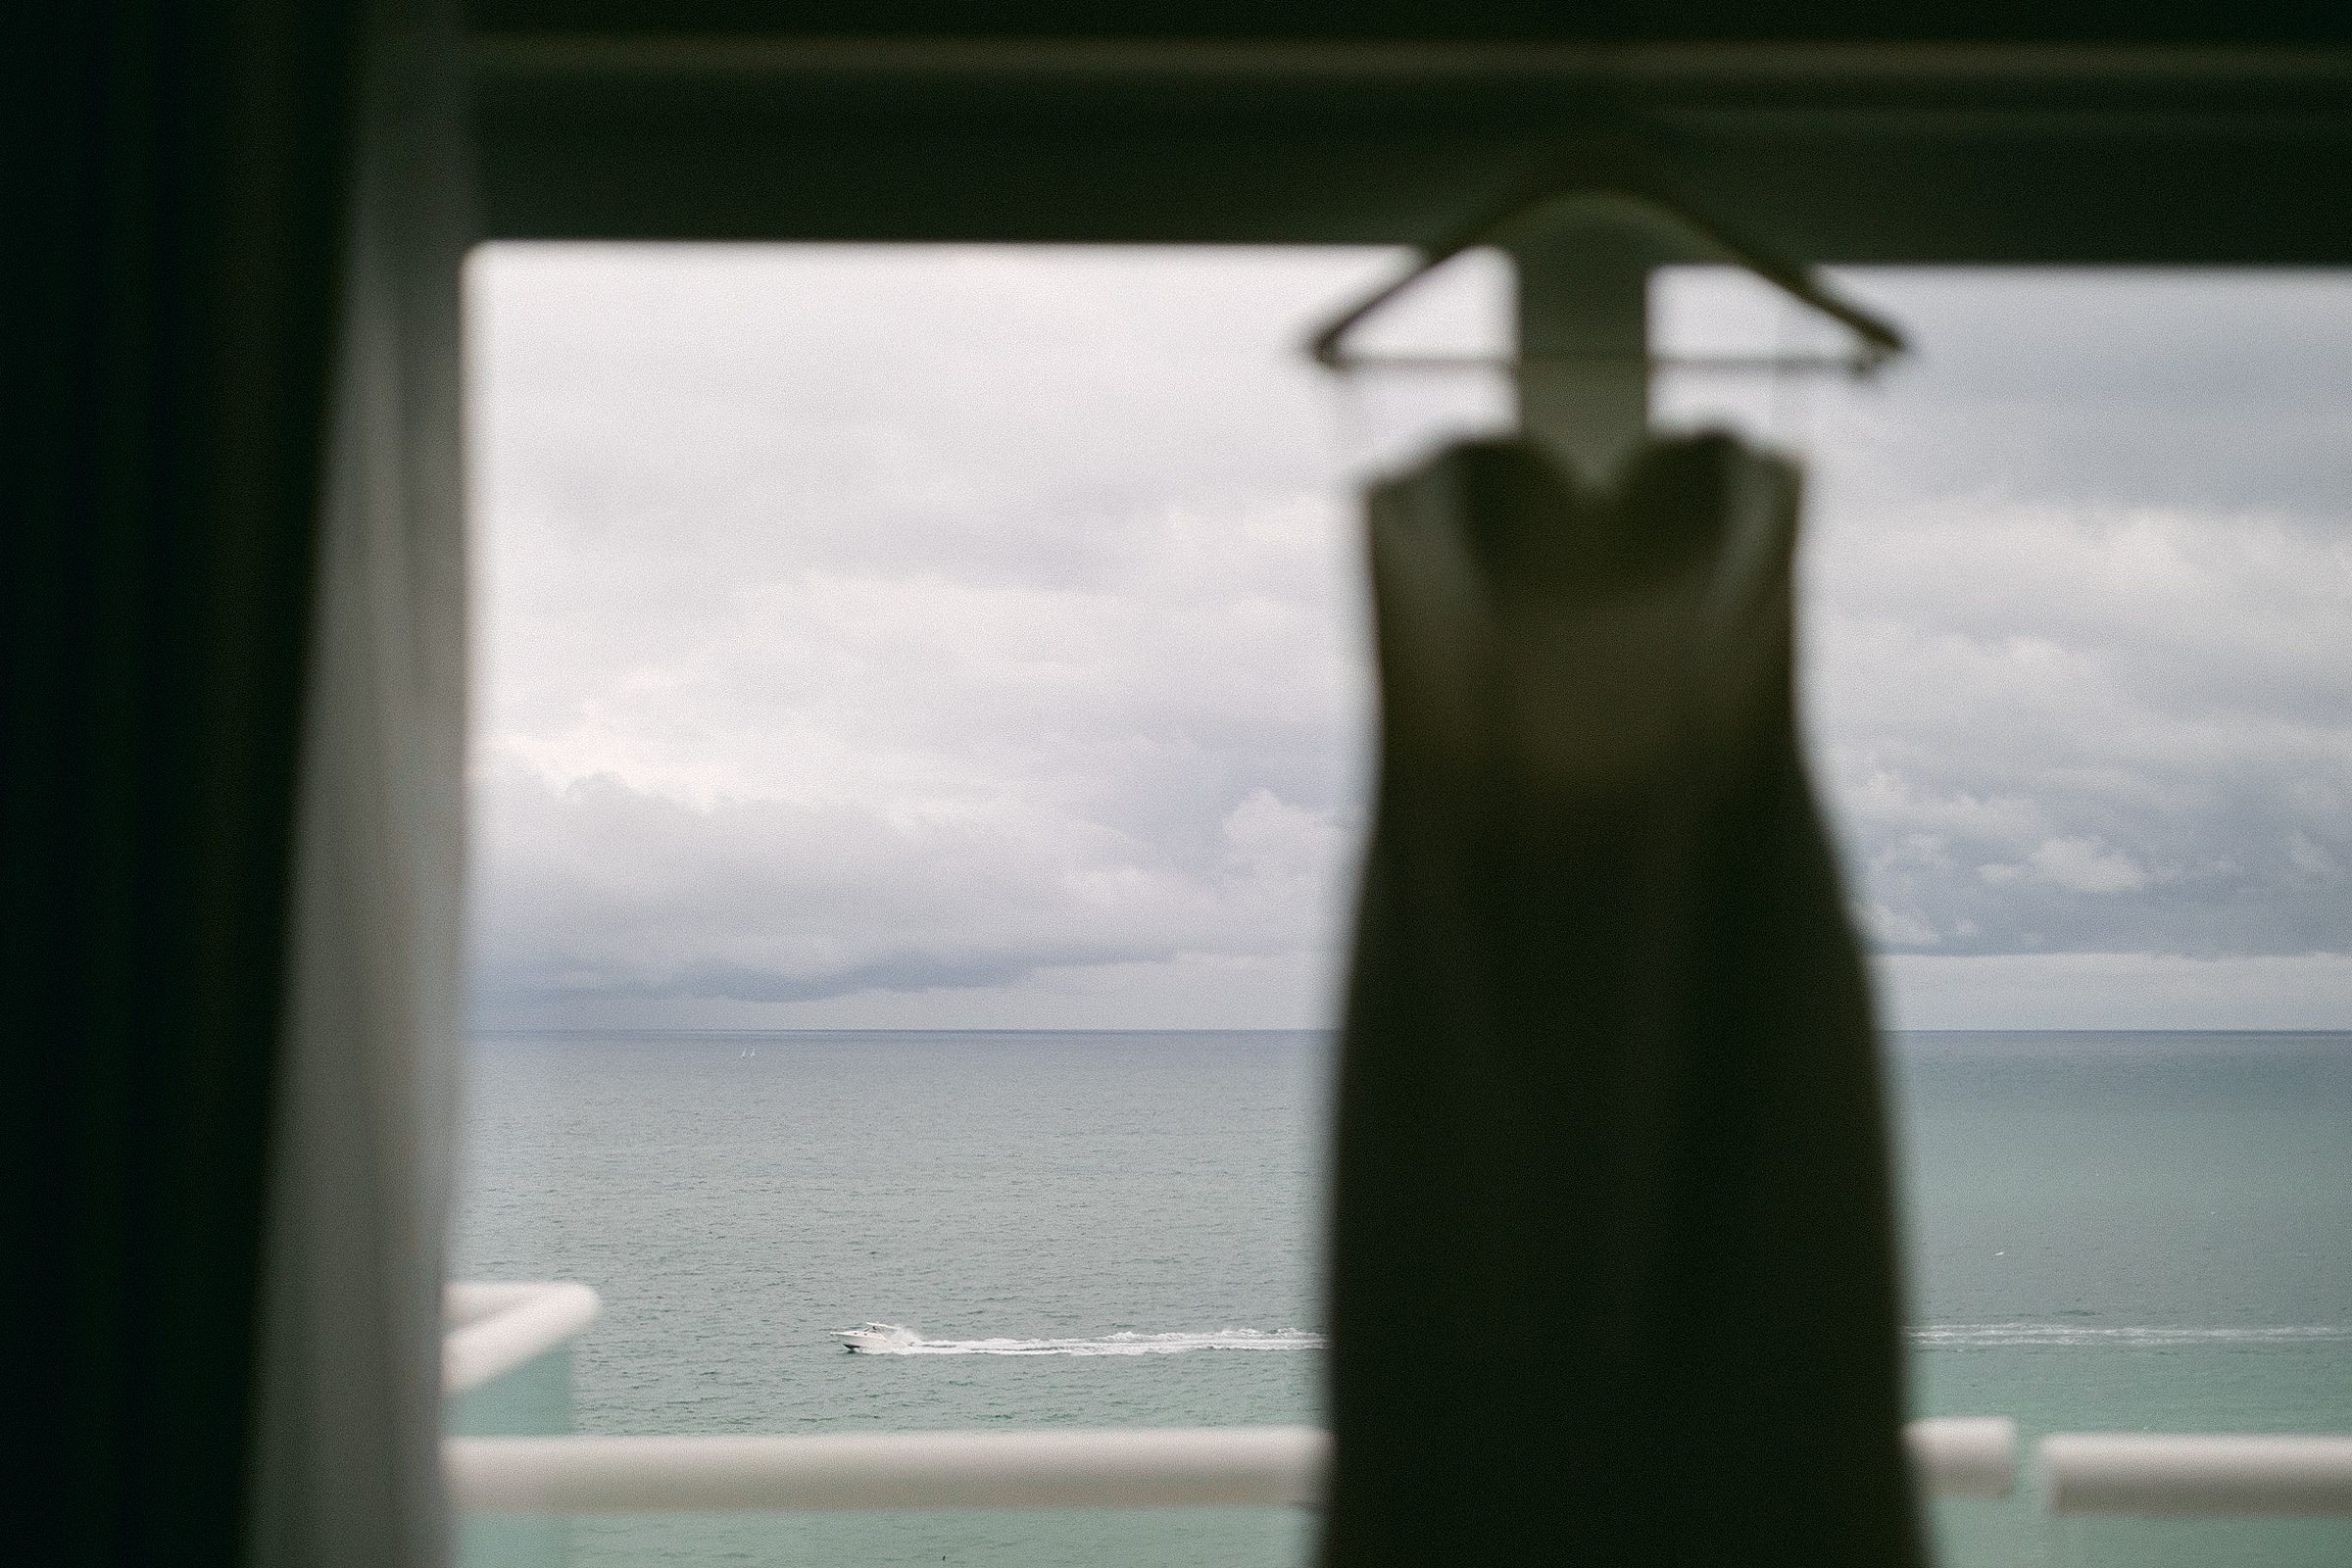 Creative composition of a wedding dress in the foreground with a speed boat racing in the background